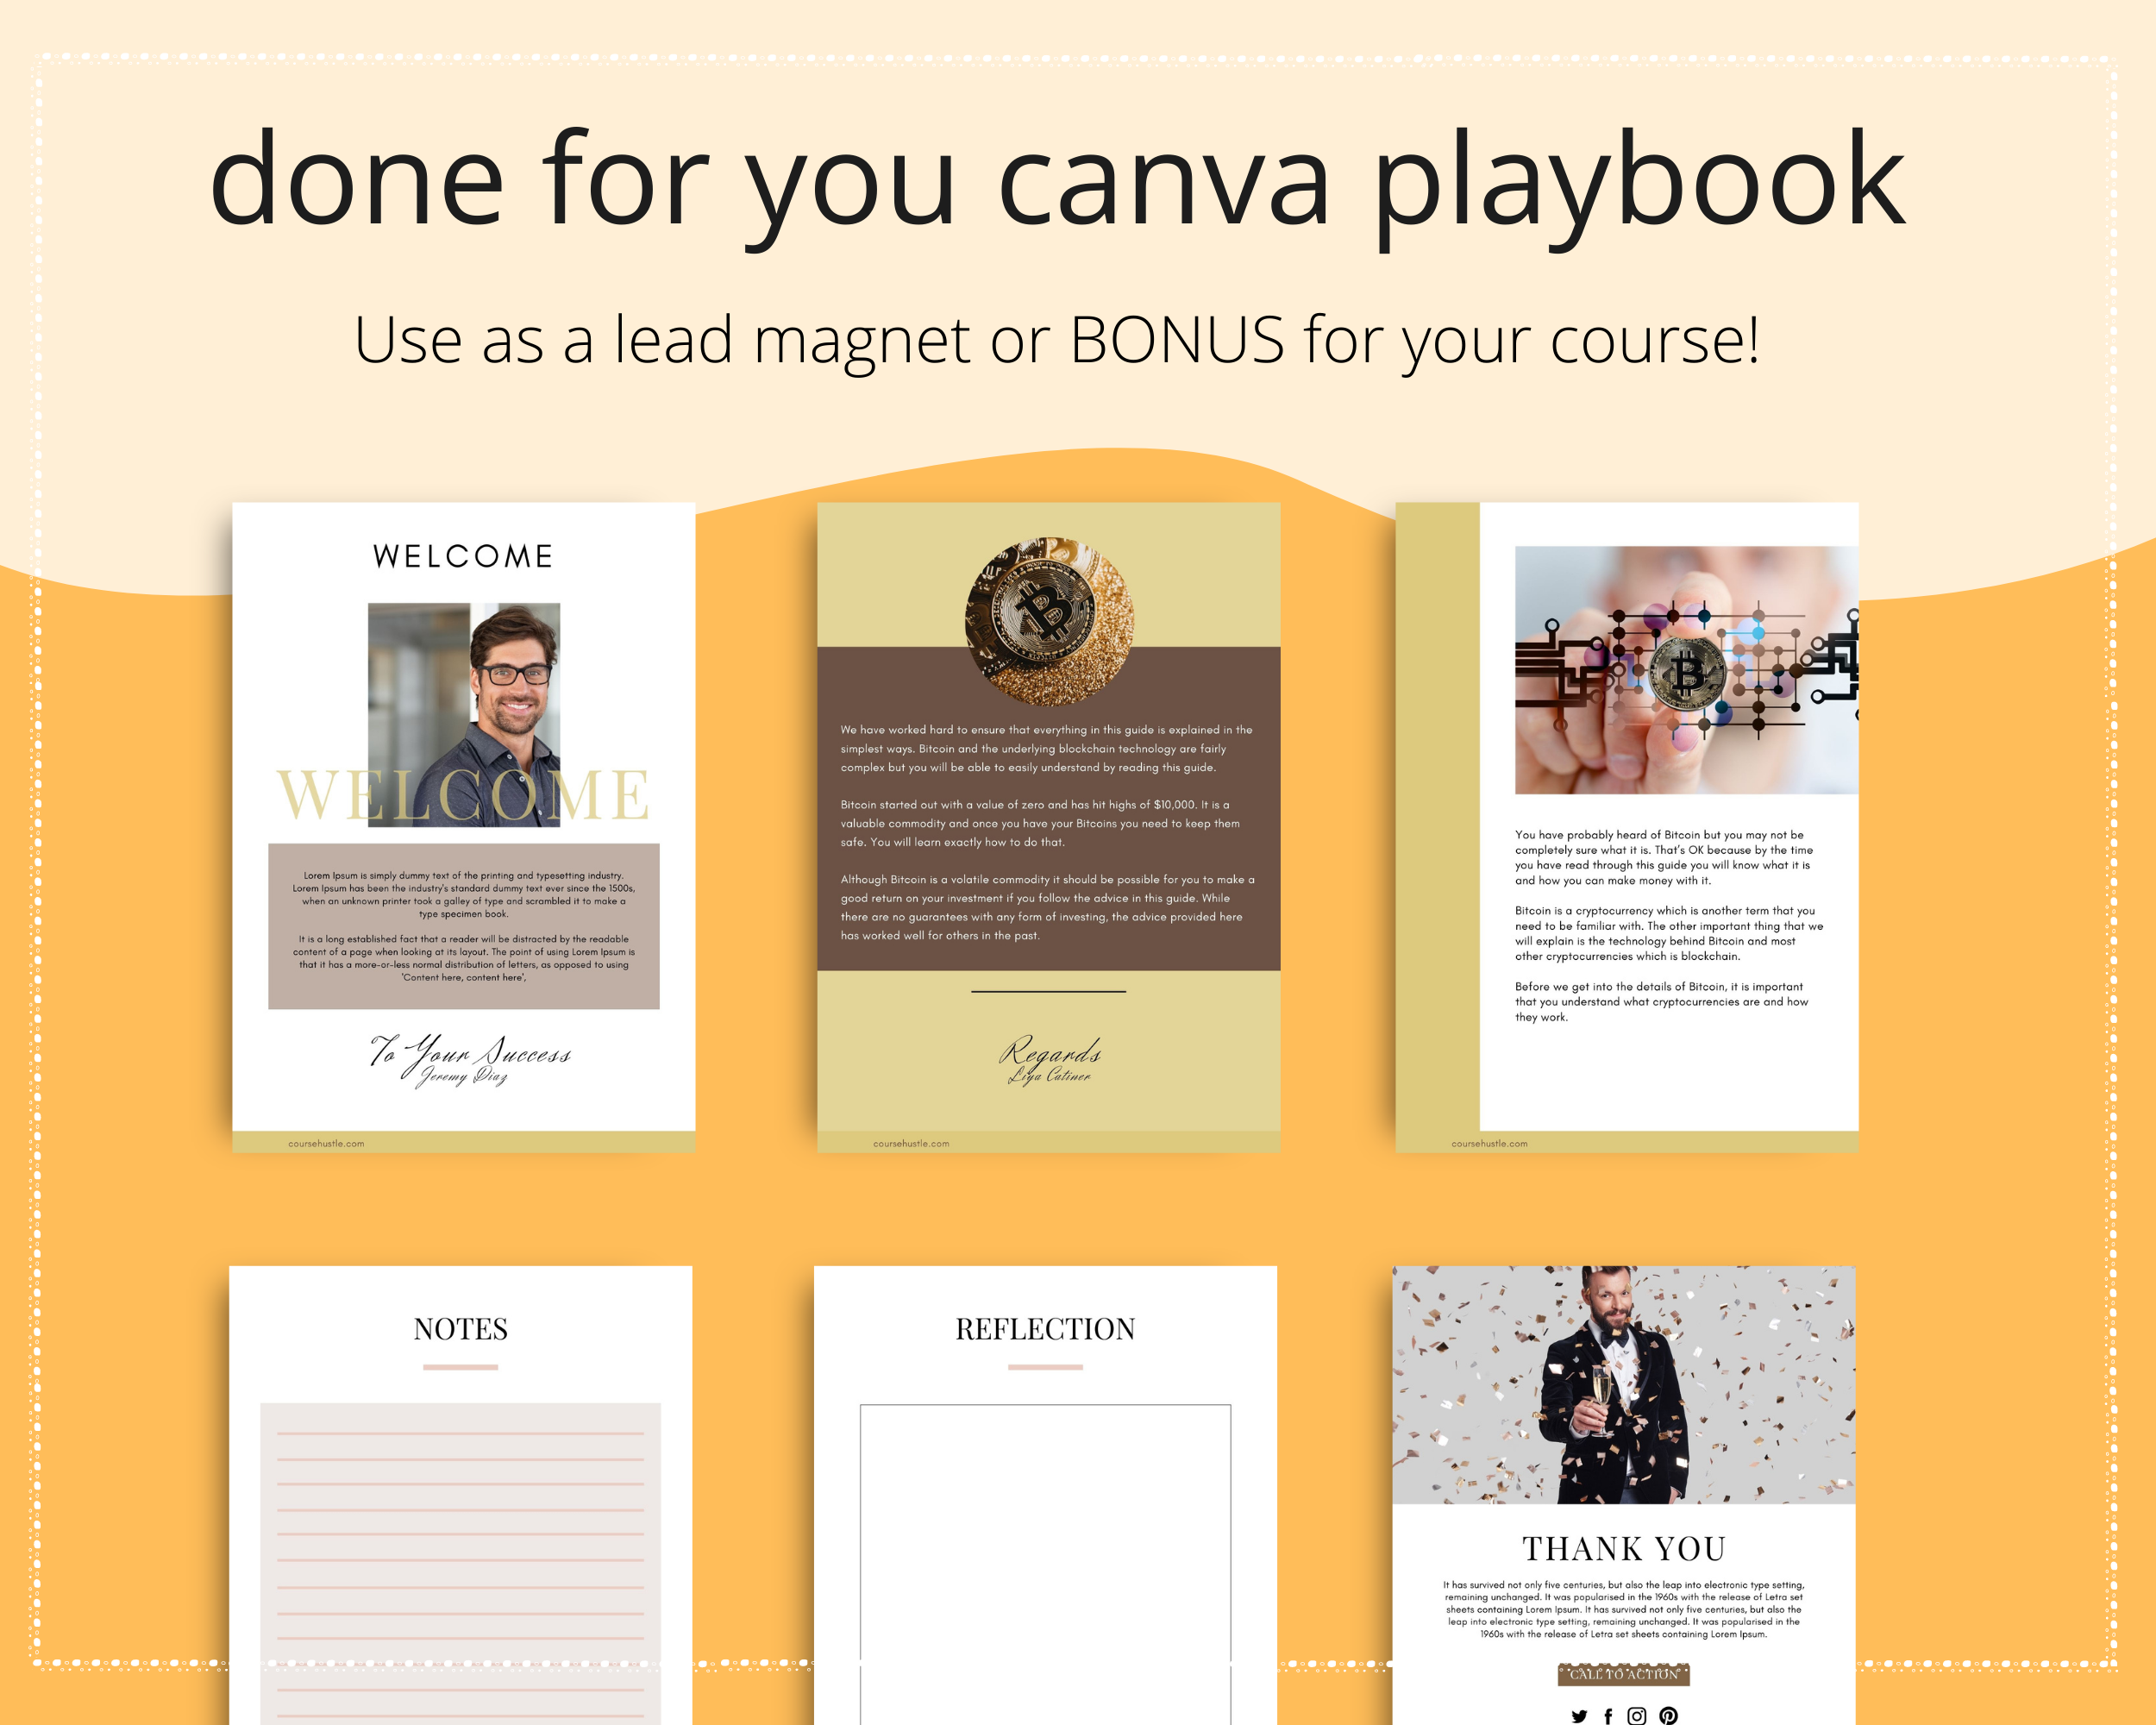 Done for You Bitcoin Breakthrough Playbook in Canva | Editable A4 Size Canva Template